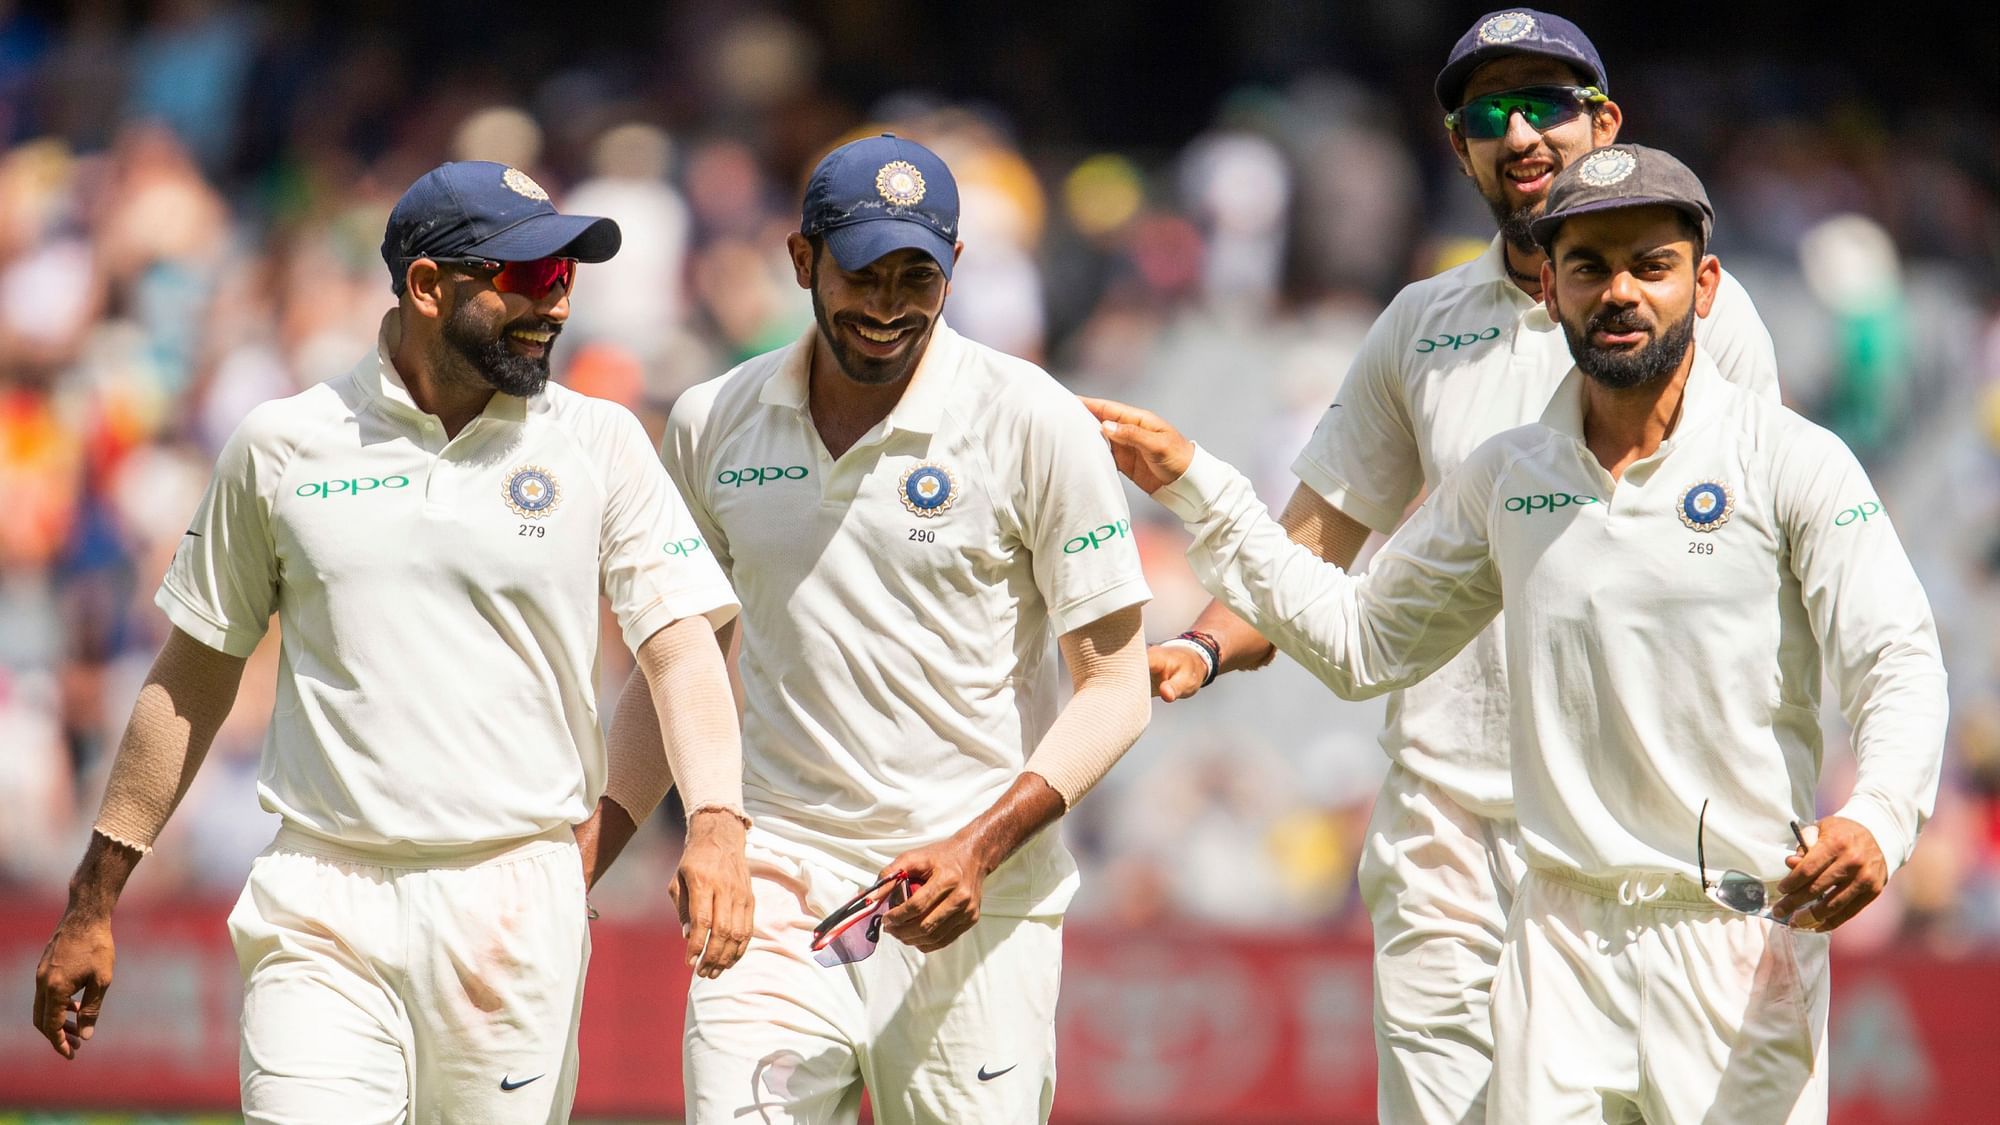 Jasprit Bumrah’s career-best 6/33 put India in pole position on Day 3 of their third Test against Australia at Melbourne.